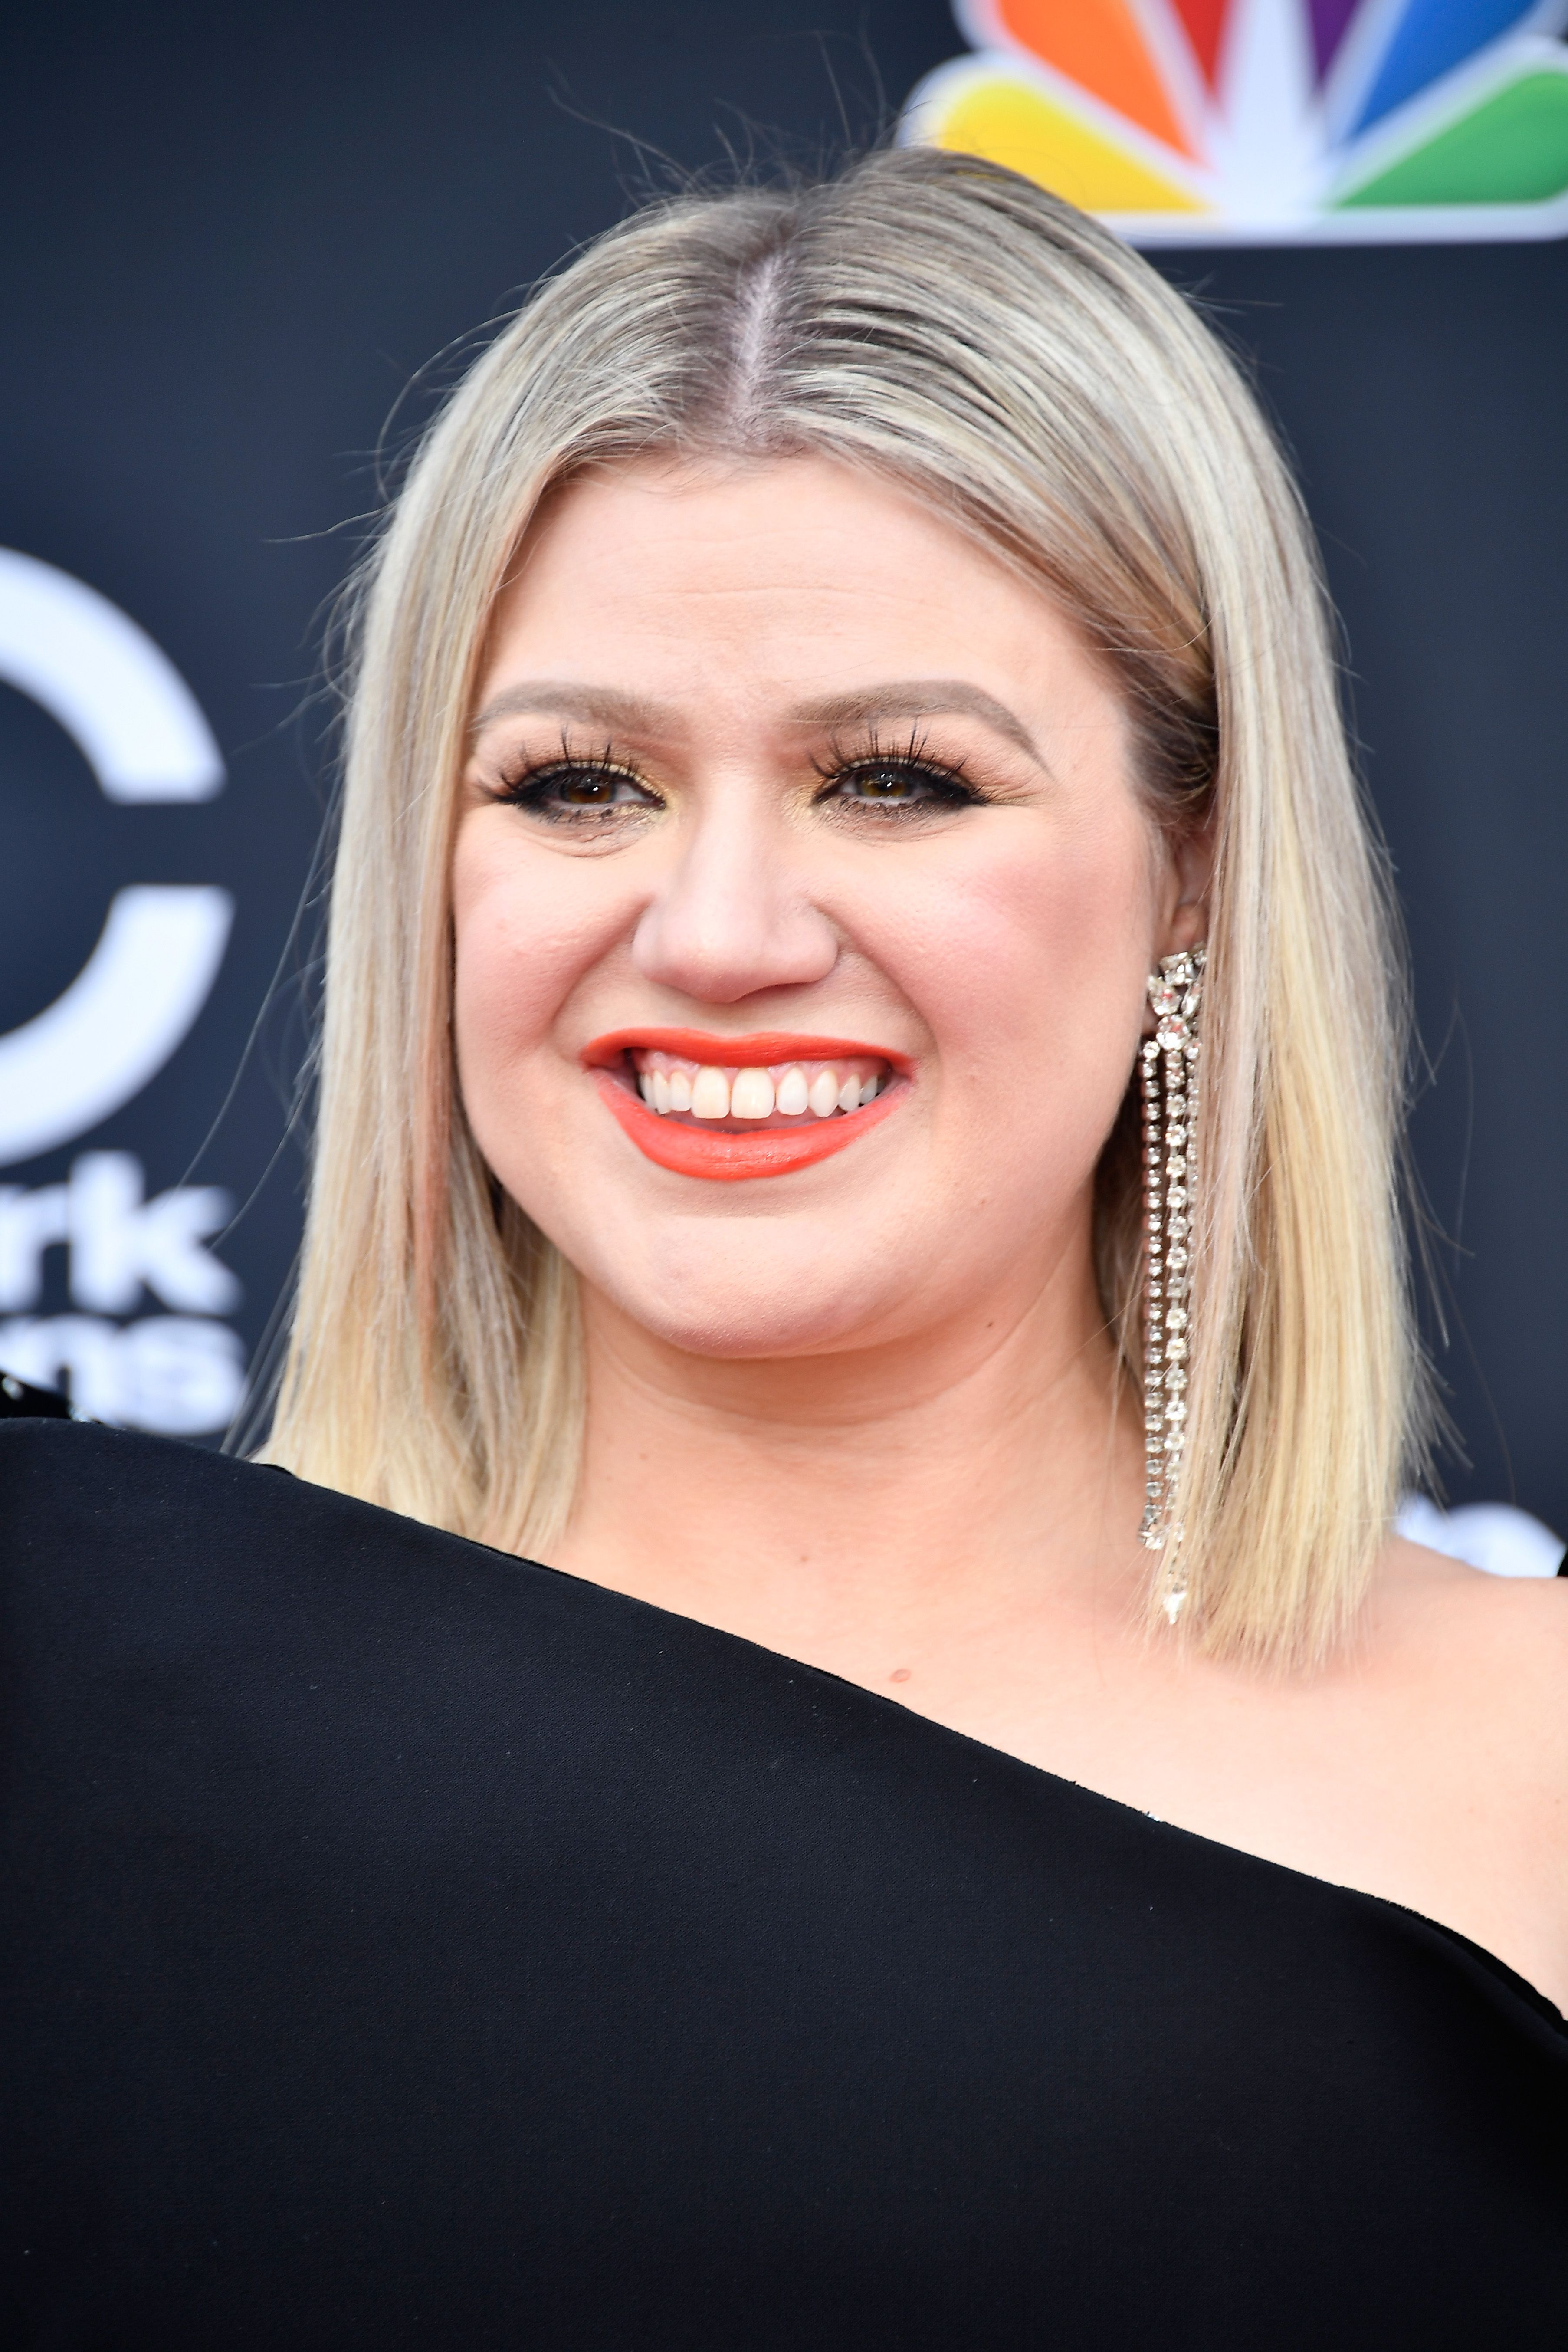 Kelly Clarkson at the 2018 Billboard Music Awards at MGM Grand Garden Arena on May 20, 2018 | Photo: Getty Images